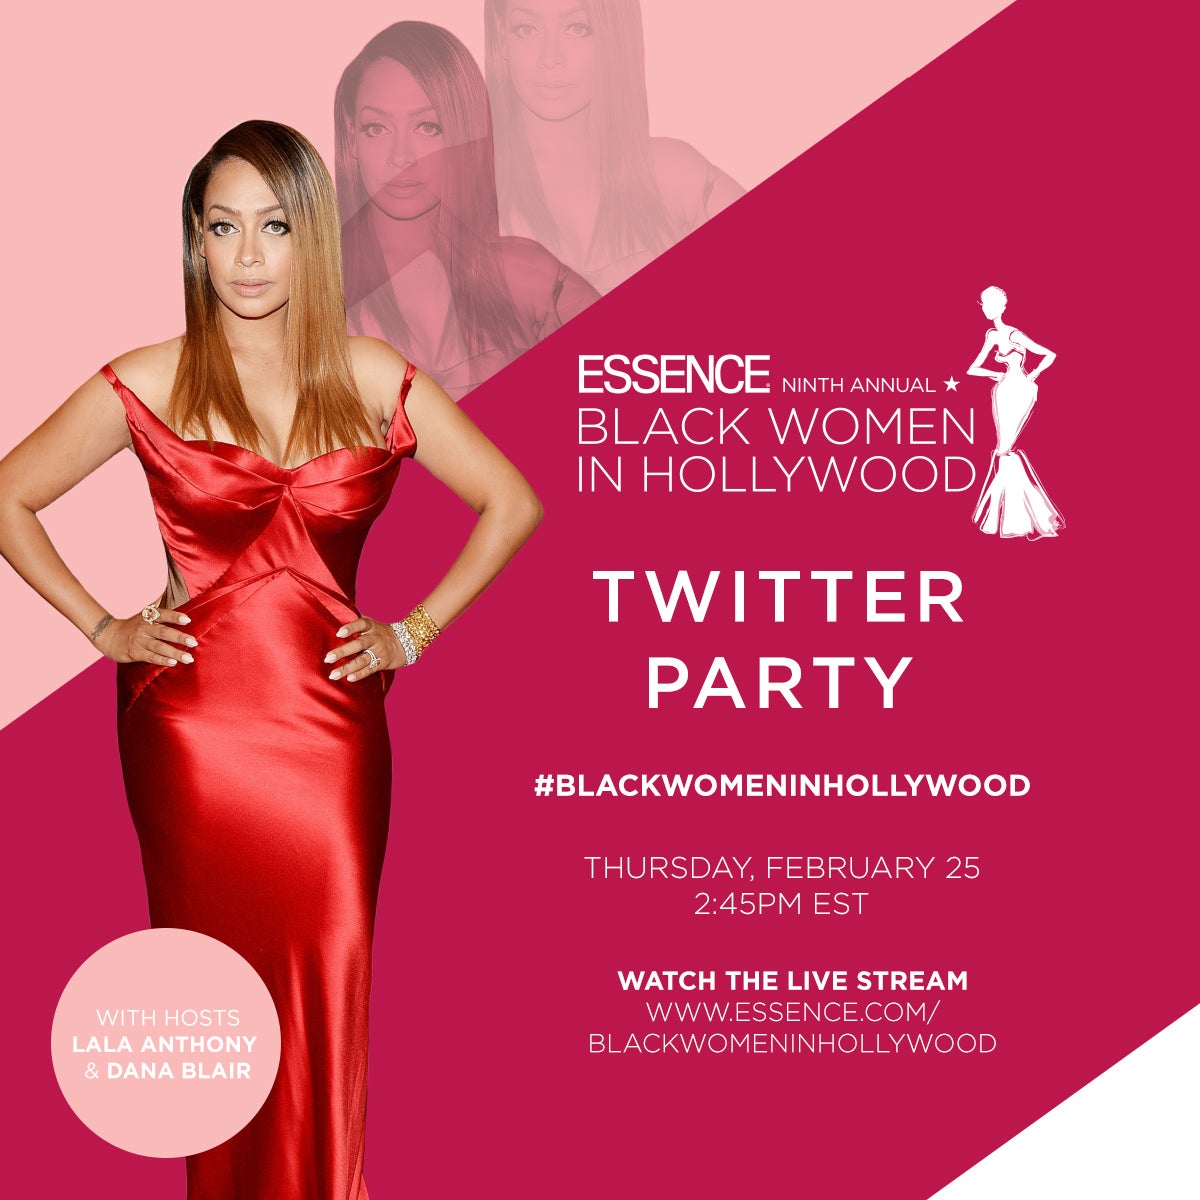 LaLa Anthony to Host ESSENCE Black Women in Hollywood Red Carpet Livestream Today!